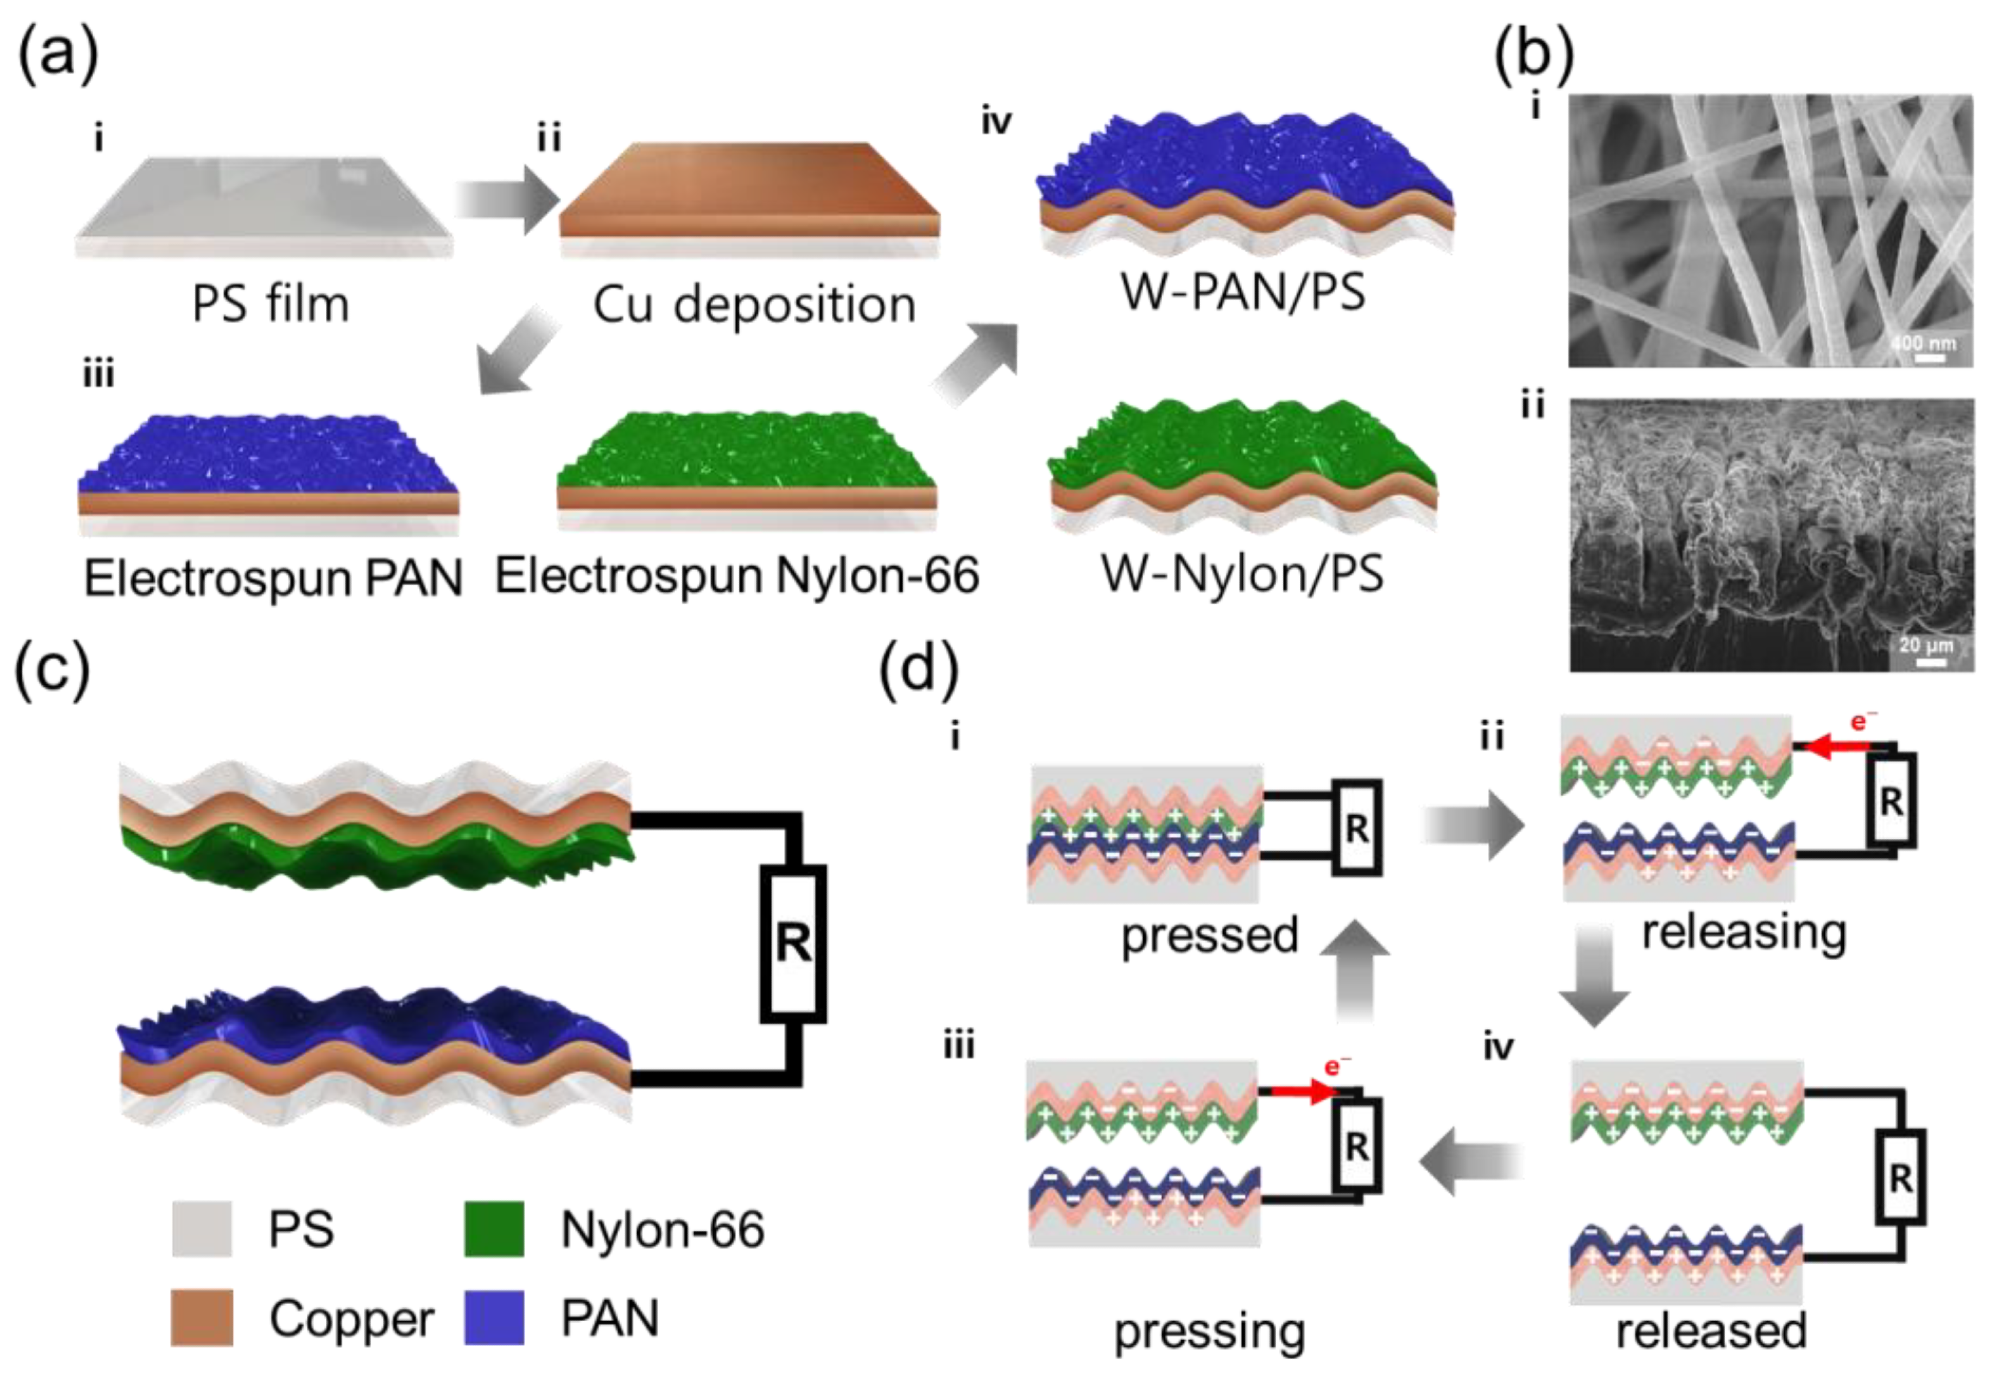 (a) Fabrication of W-PAN/PS and W-Nylon/PS electrode. (b) Field emission scanning electron microscope (FE-SEM) image of W-PAN/PS. (c) Schematic diagram of wrinkled TENG (W-TENG). (d) Schematic diagram of the electricity-generation process of W-TENG.